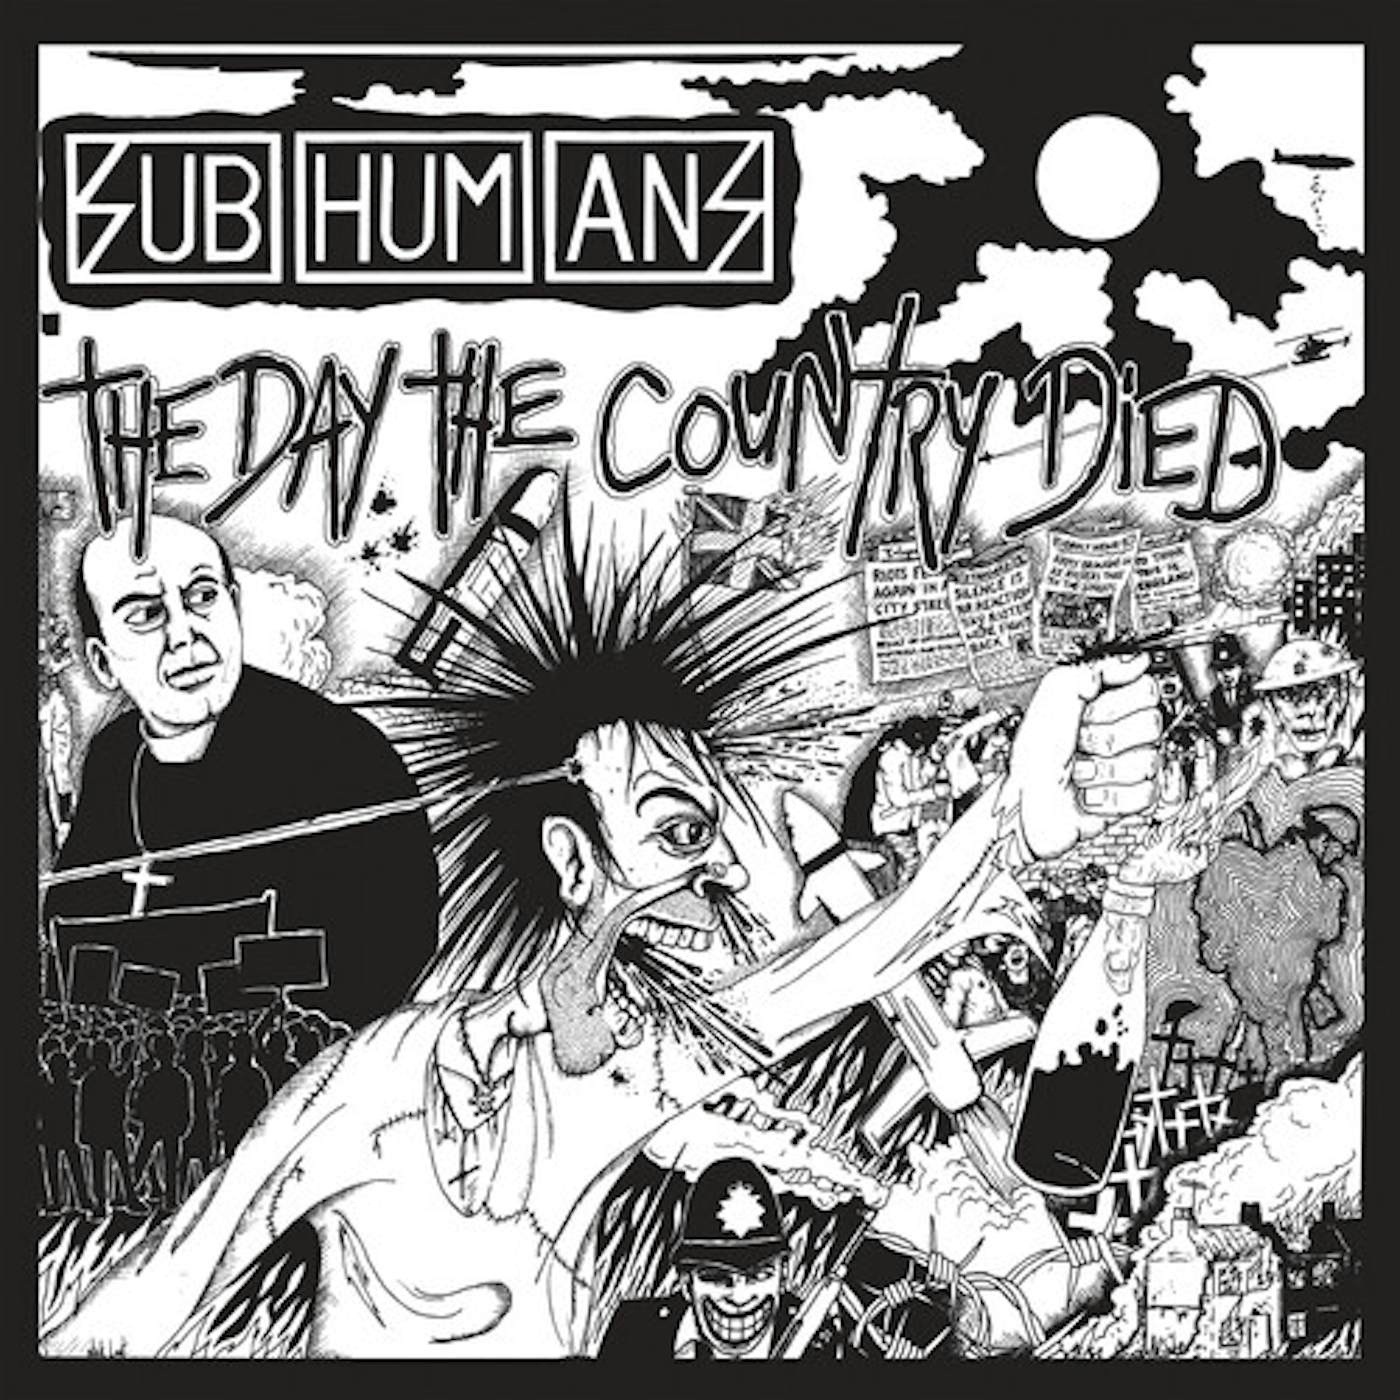 Subhumans DAY THE COUNTRY DIED Vinyl Record